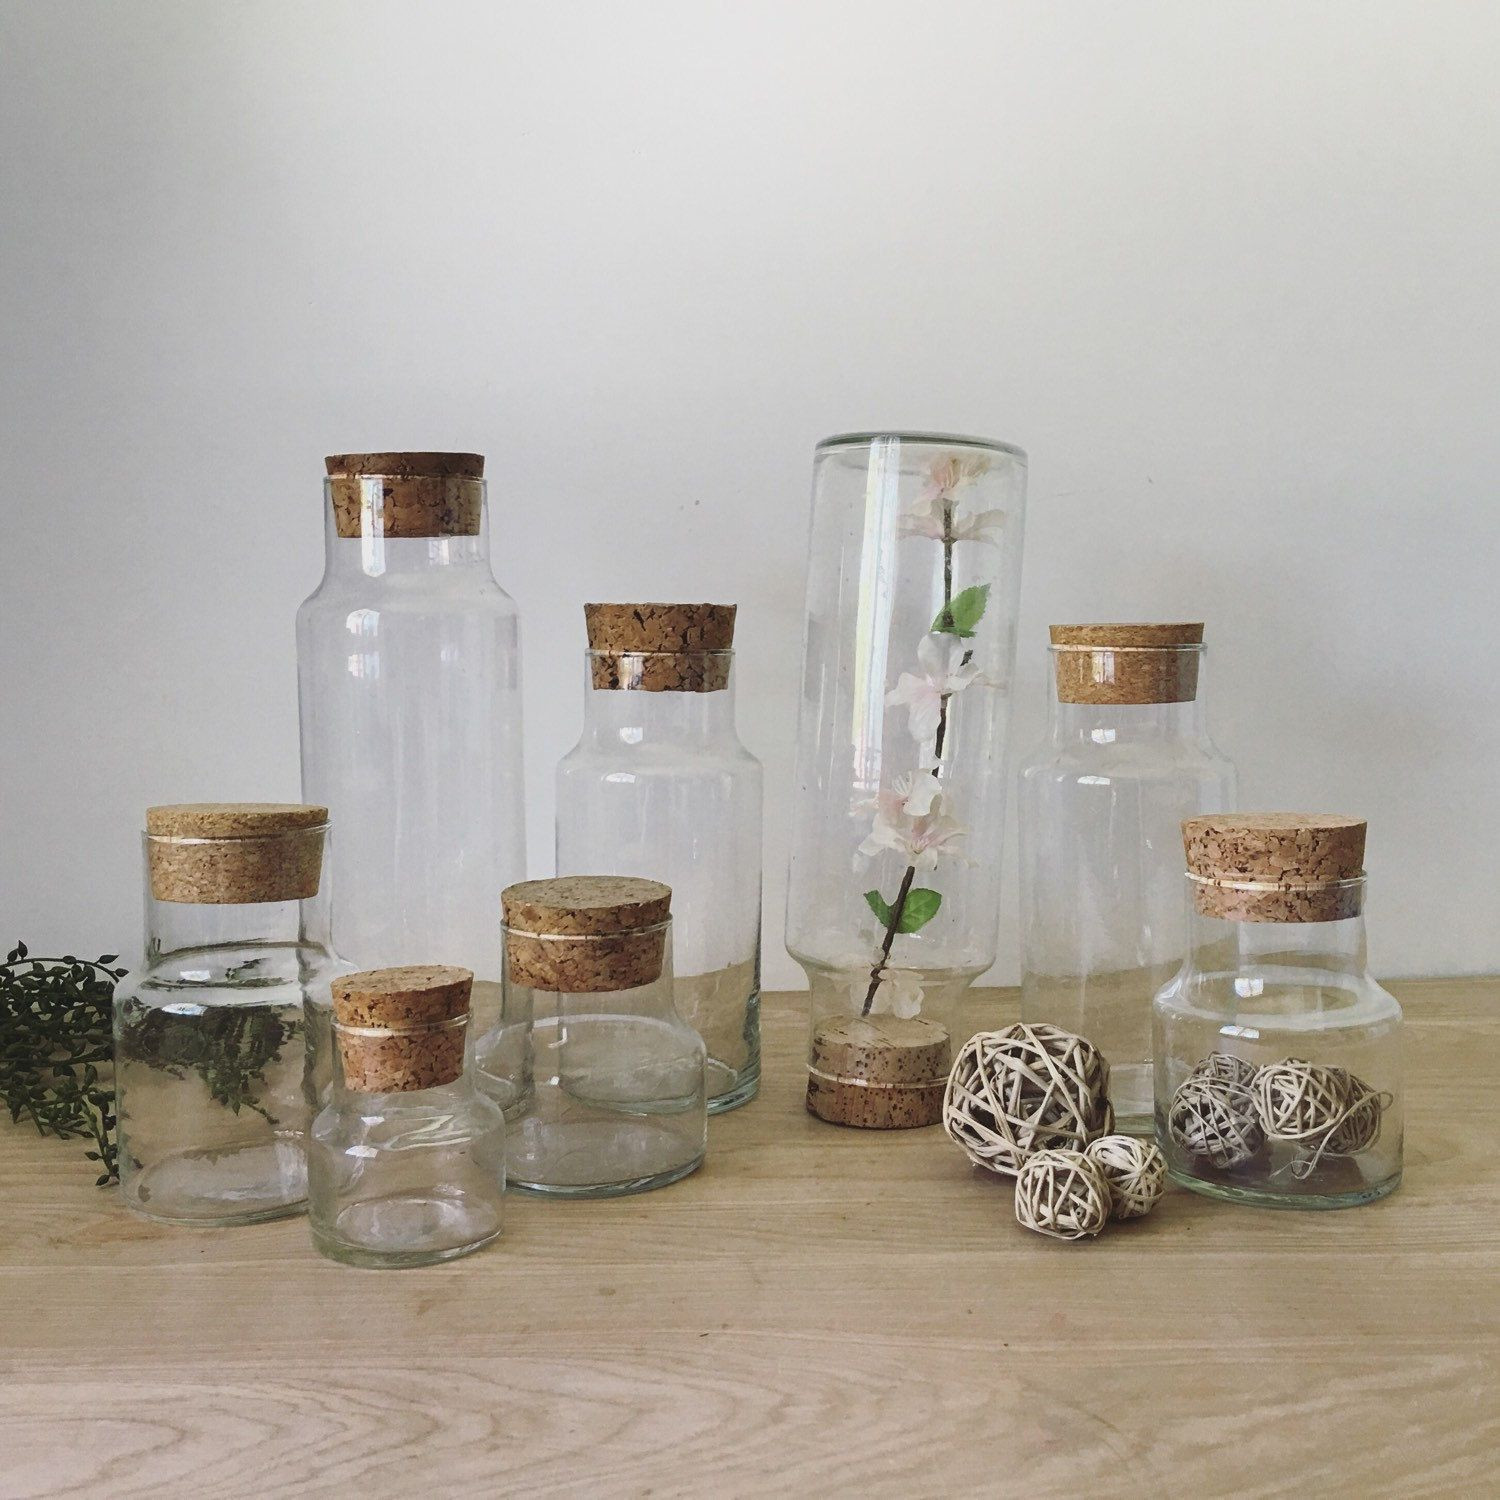 twisted square glass vase of cylinder clear glass apothecary jars with cork lids multiple inside restock of apothecary jars with cork lids various sizes available listing is for tall cylinder jars but there are also square shaped available